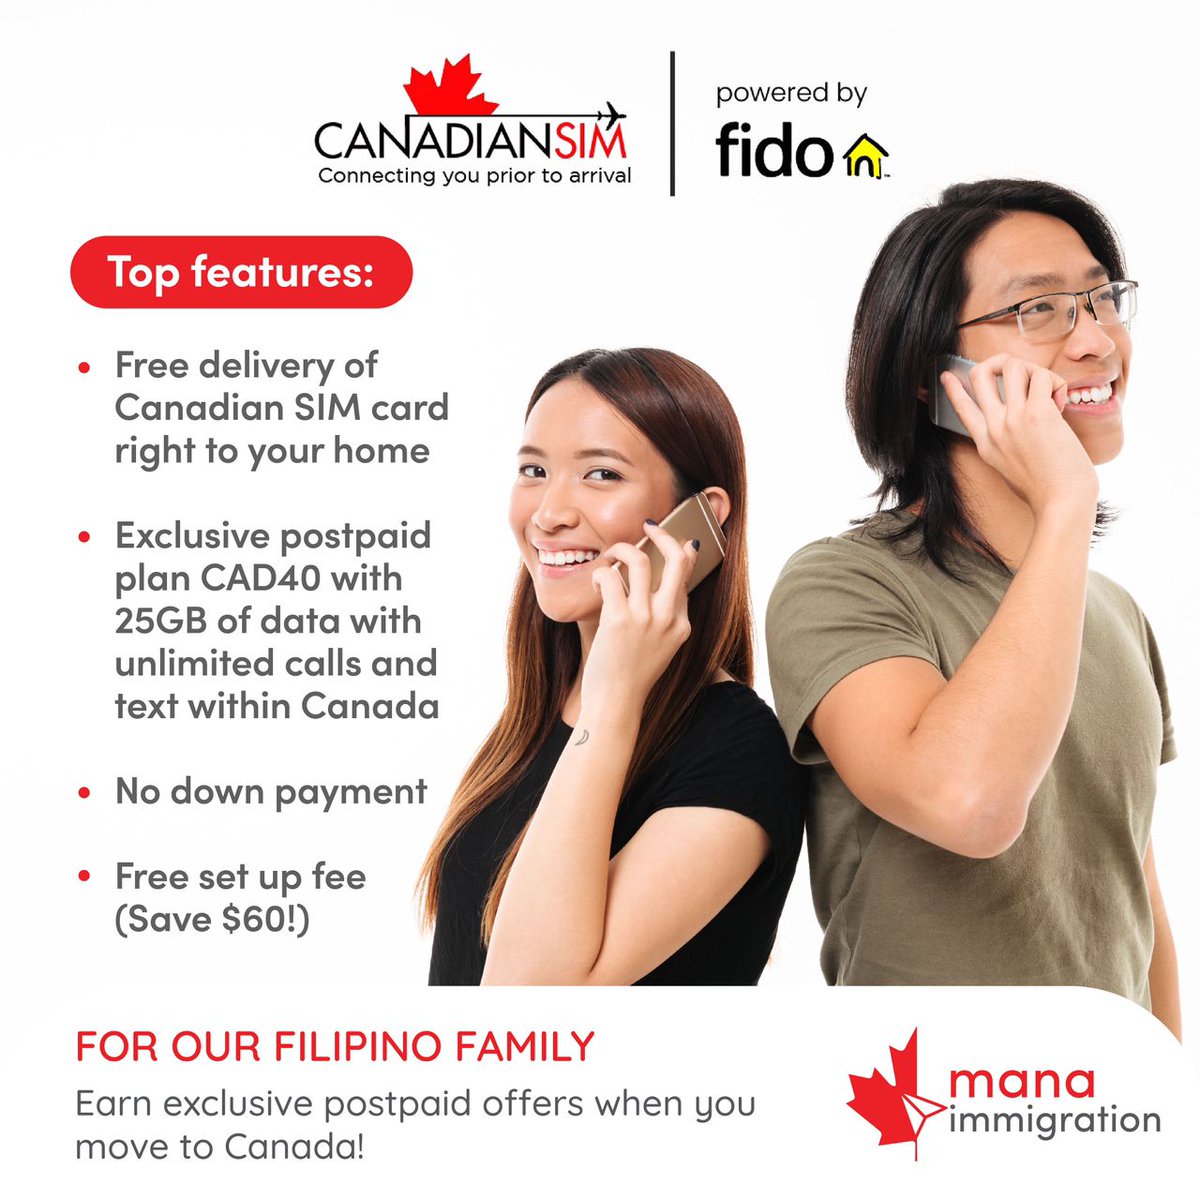 At mana immigration, we are thrilled to announce our partnership with Canadian SIM™ to give exclusive postpaid offers to Filipinos moving to Canada. (1/3)

#immigration #canada #canadiansim  #simcard #internationalsimcard #internationalstudents  #philippines #filipino